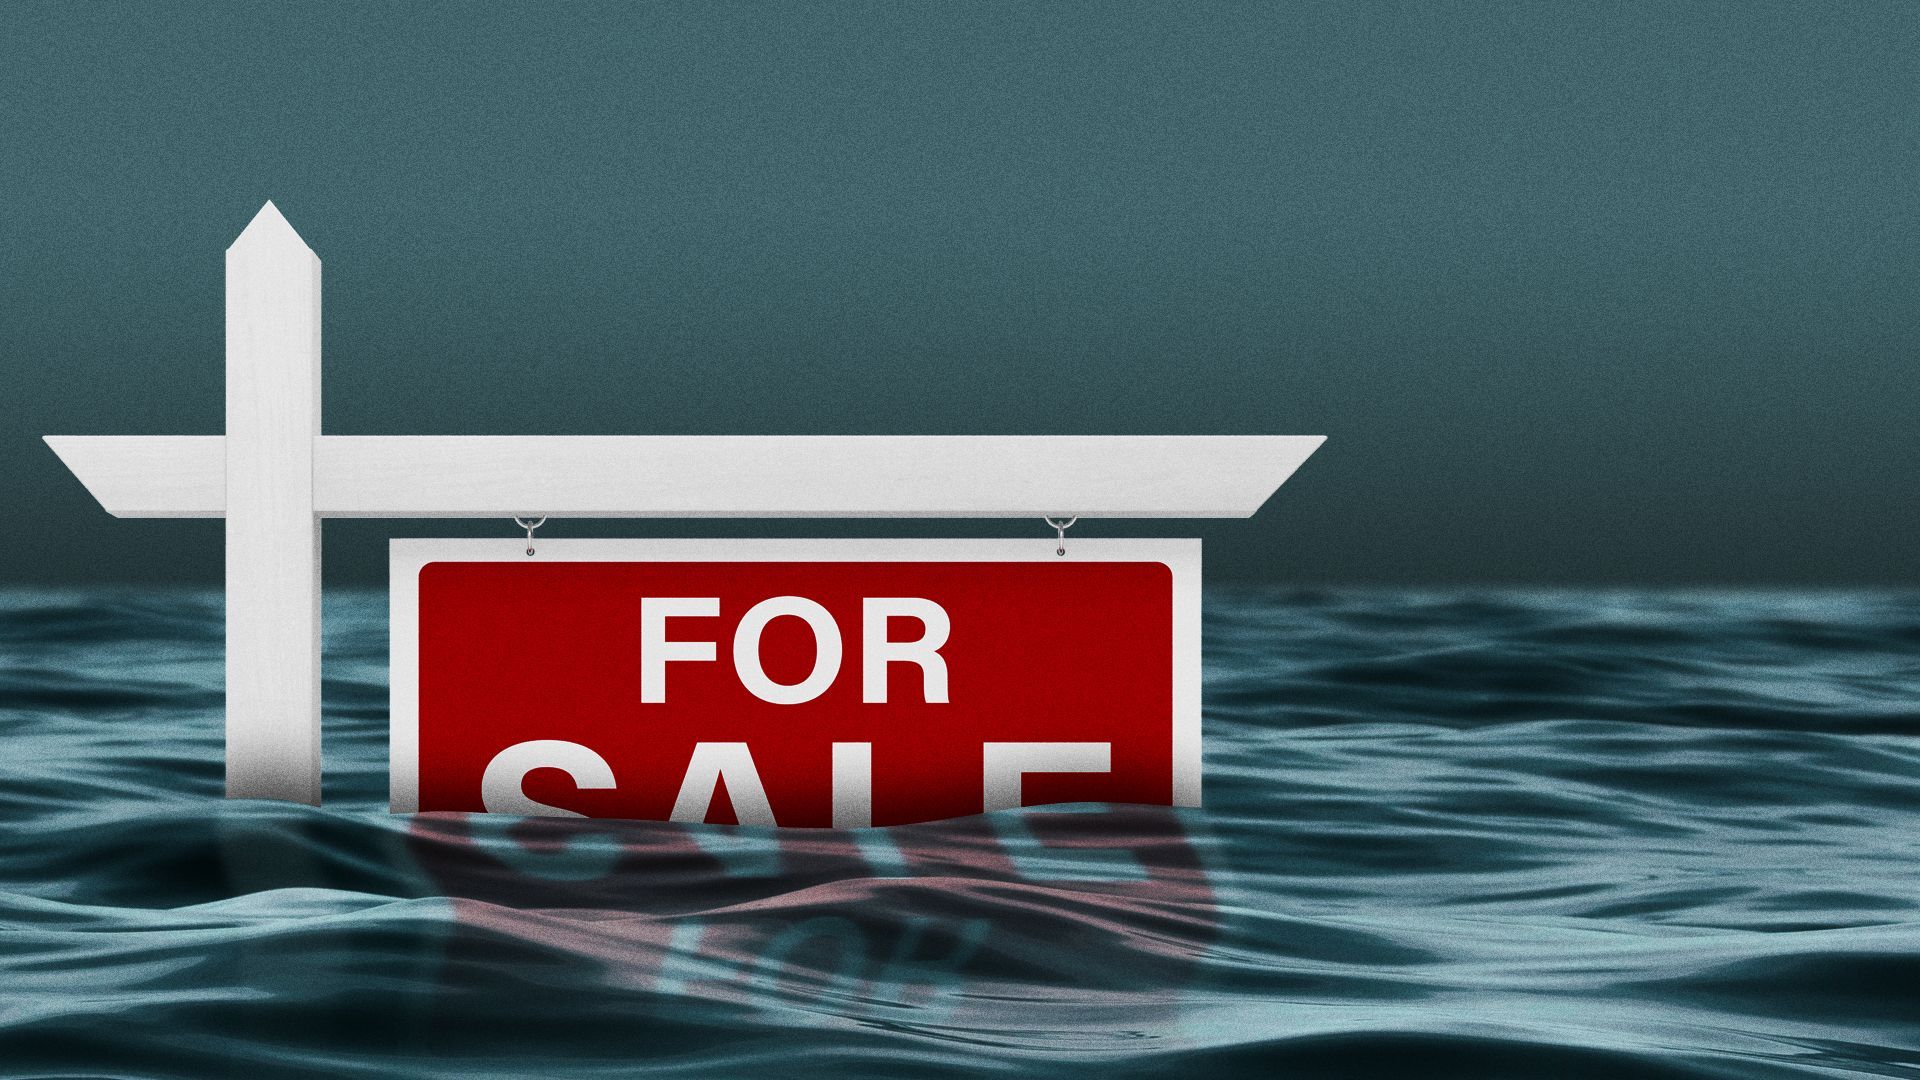 Illustration of a "For Sale" sign post flooded in water. 